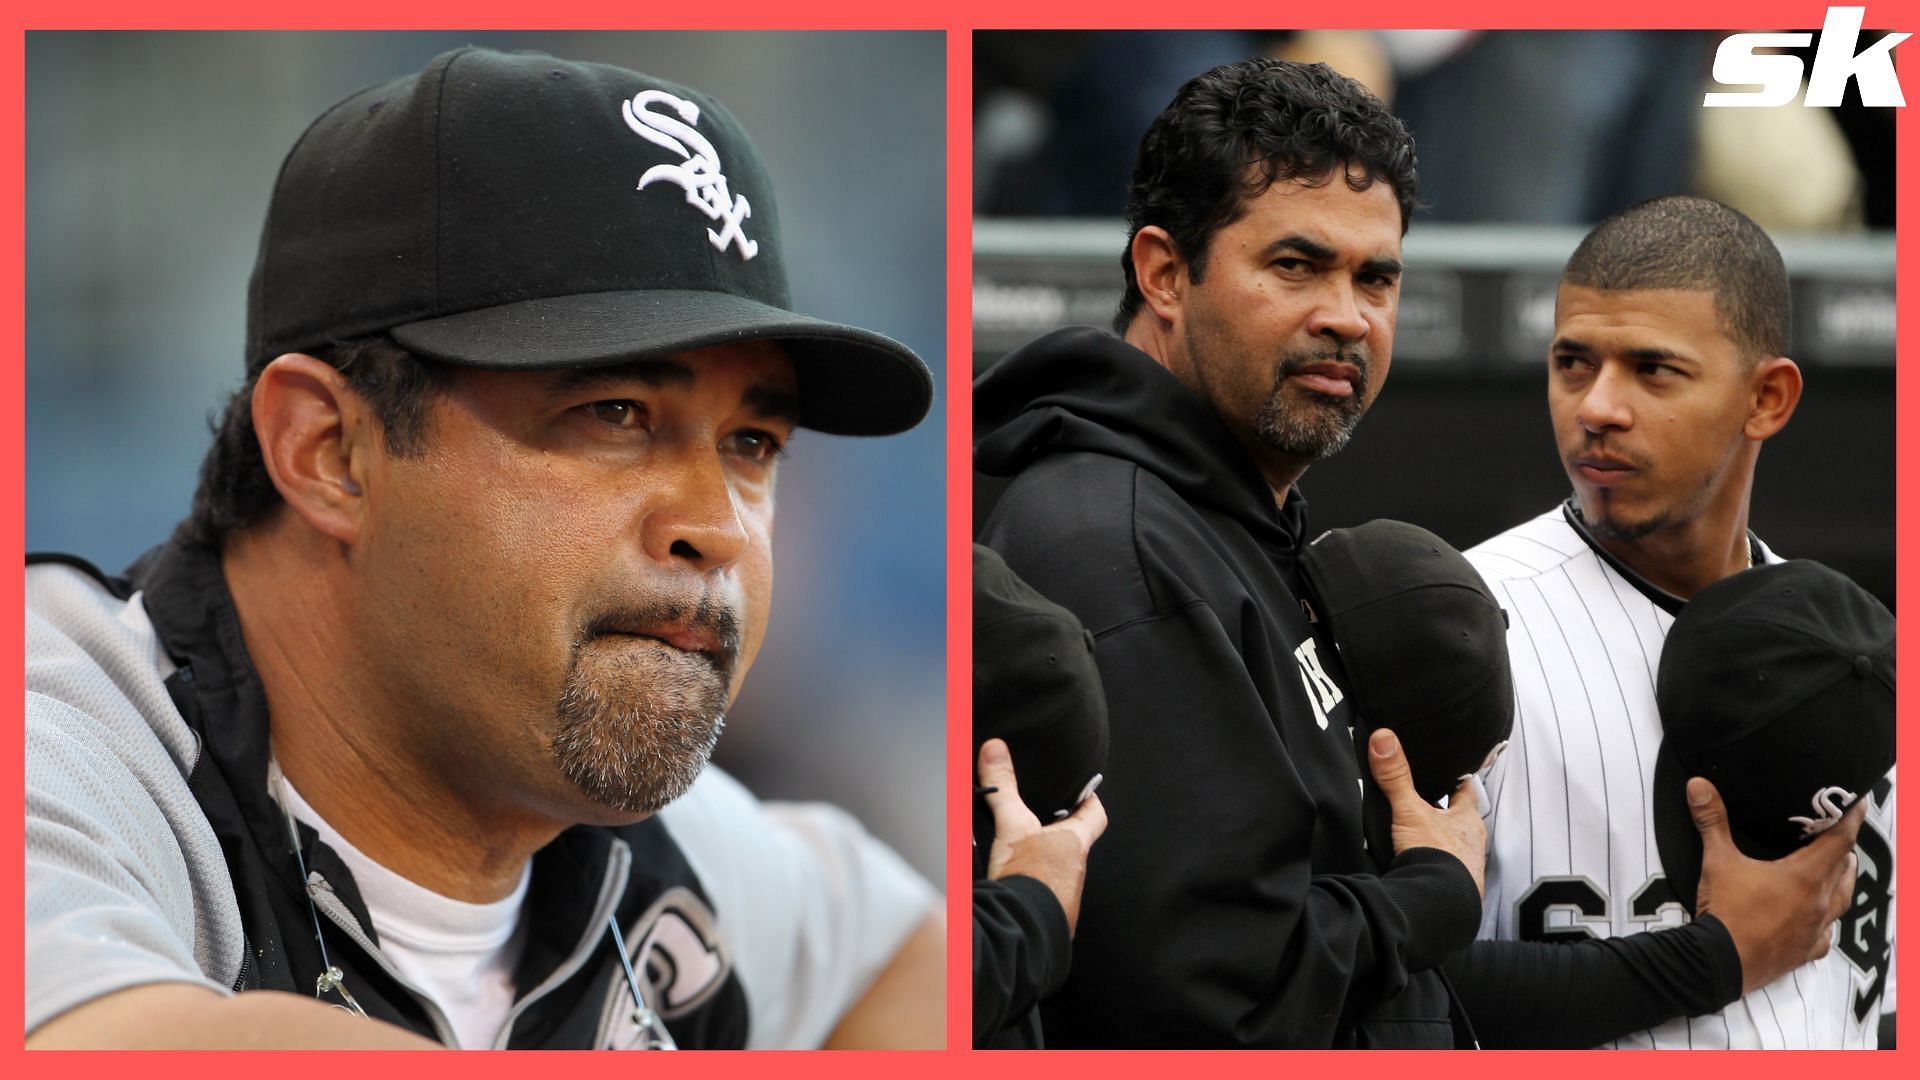 Chicago White Sox former manager Ozzie Guillen